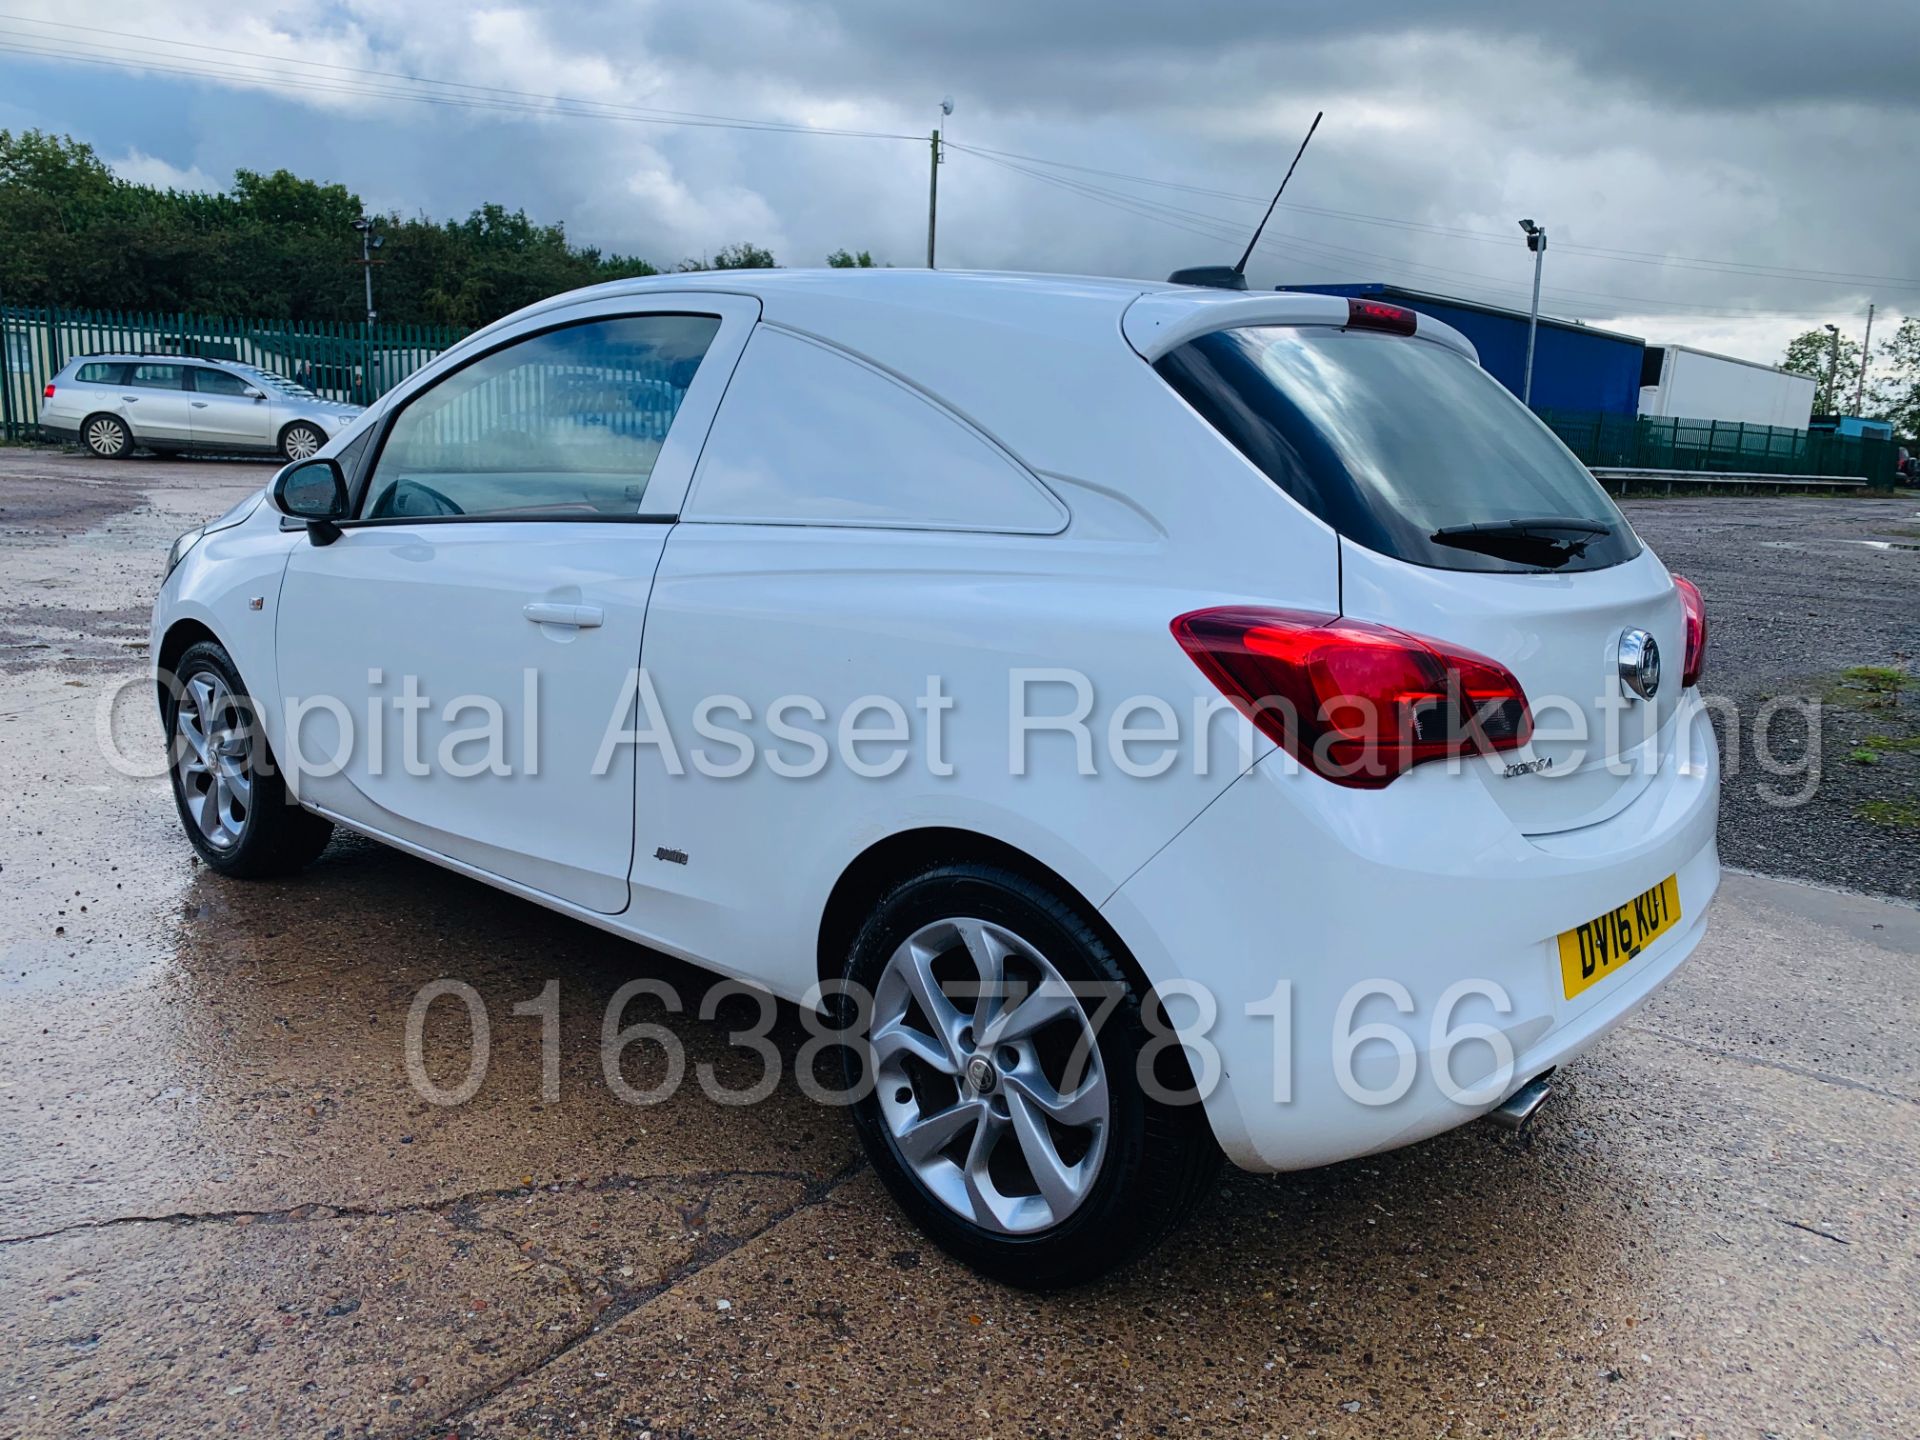 (On Sale) VAUXHALL CORSA *SPORTIVE - VAN* (2016 - NEW MODEL) '95 BHP - 6 SPEED' *A/C* (1 OWNER) - Image 9 of 43